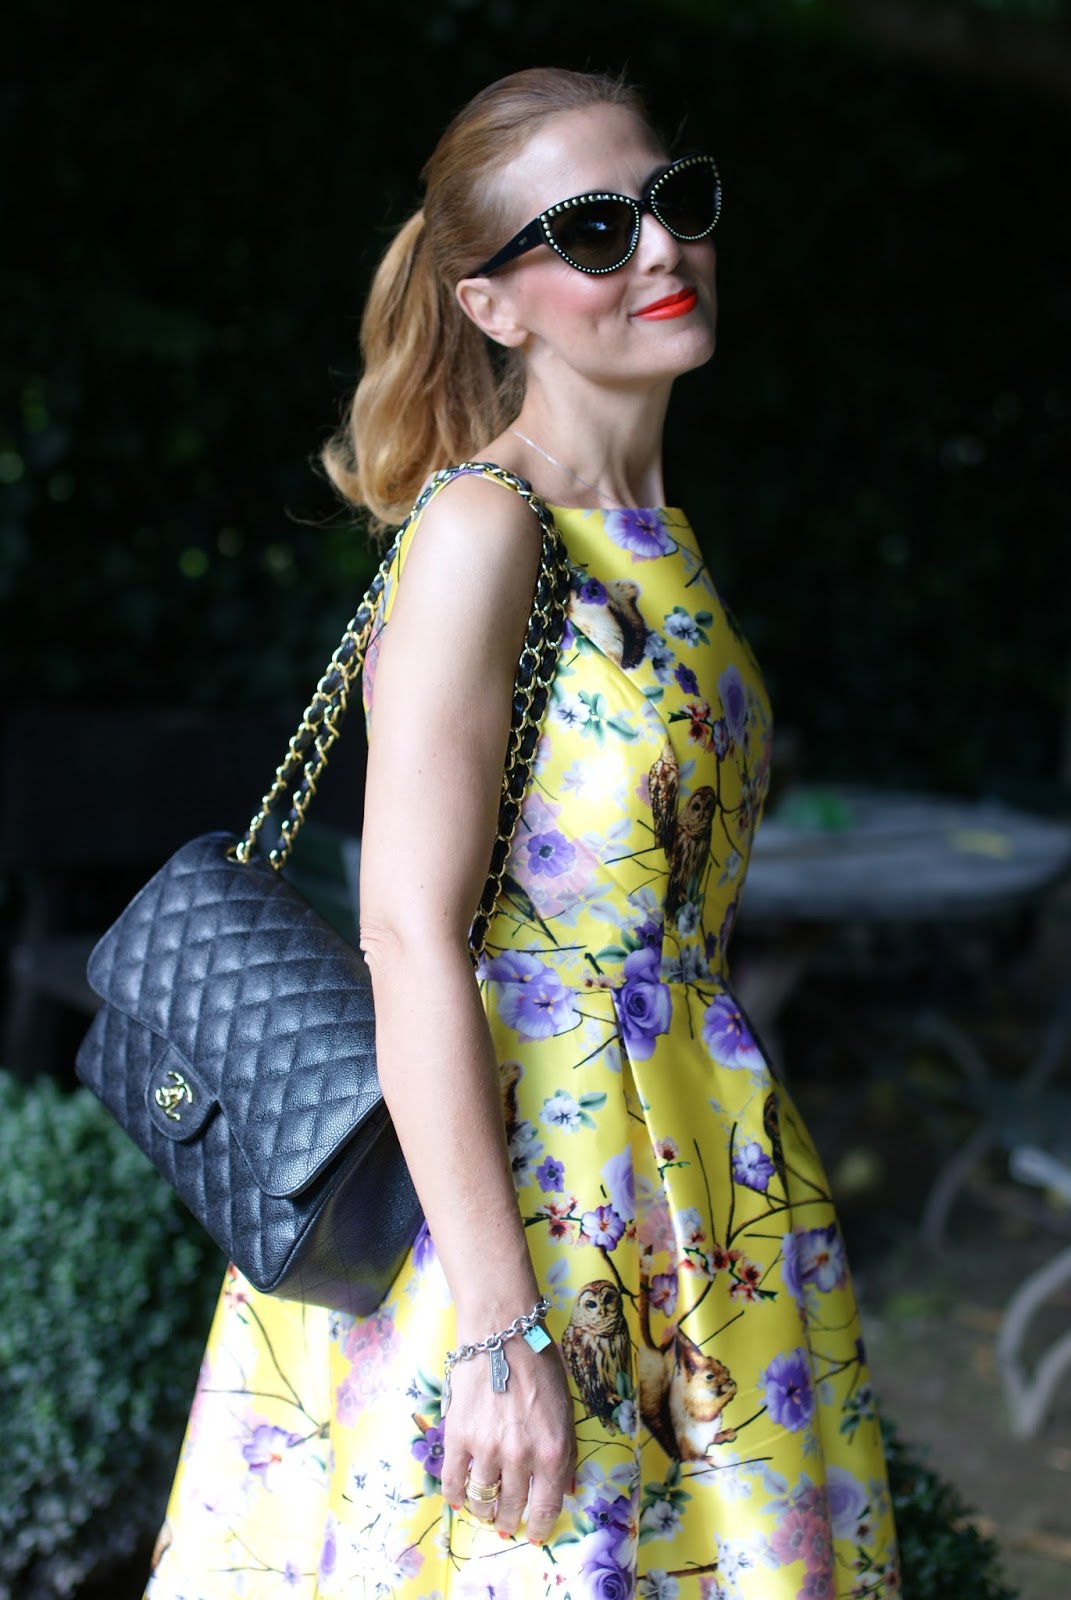 Zaful floral and owls print dress with Chanel classic flap bag and fashionable ducks on Fashion and Cookies fashion blog